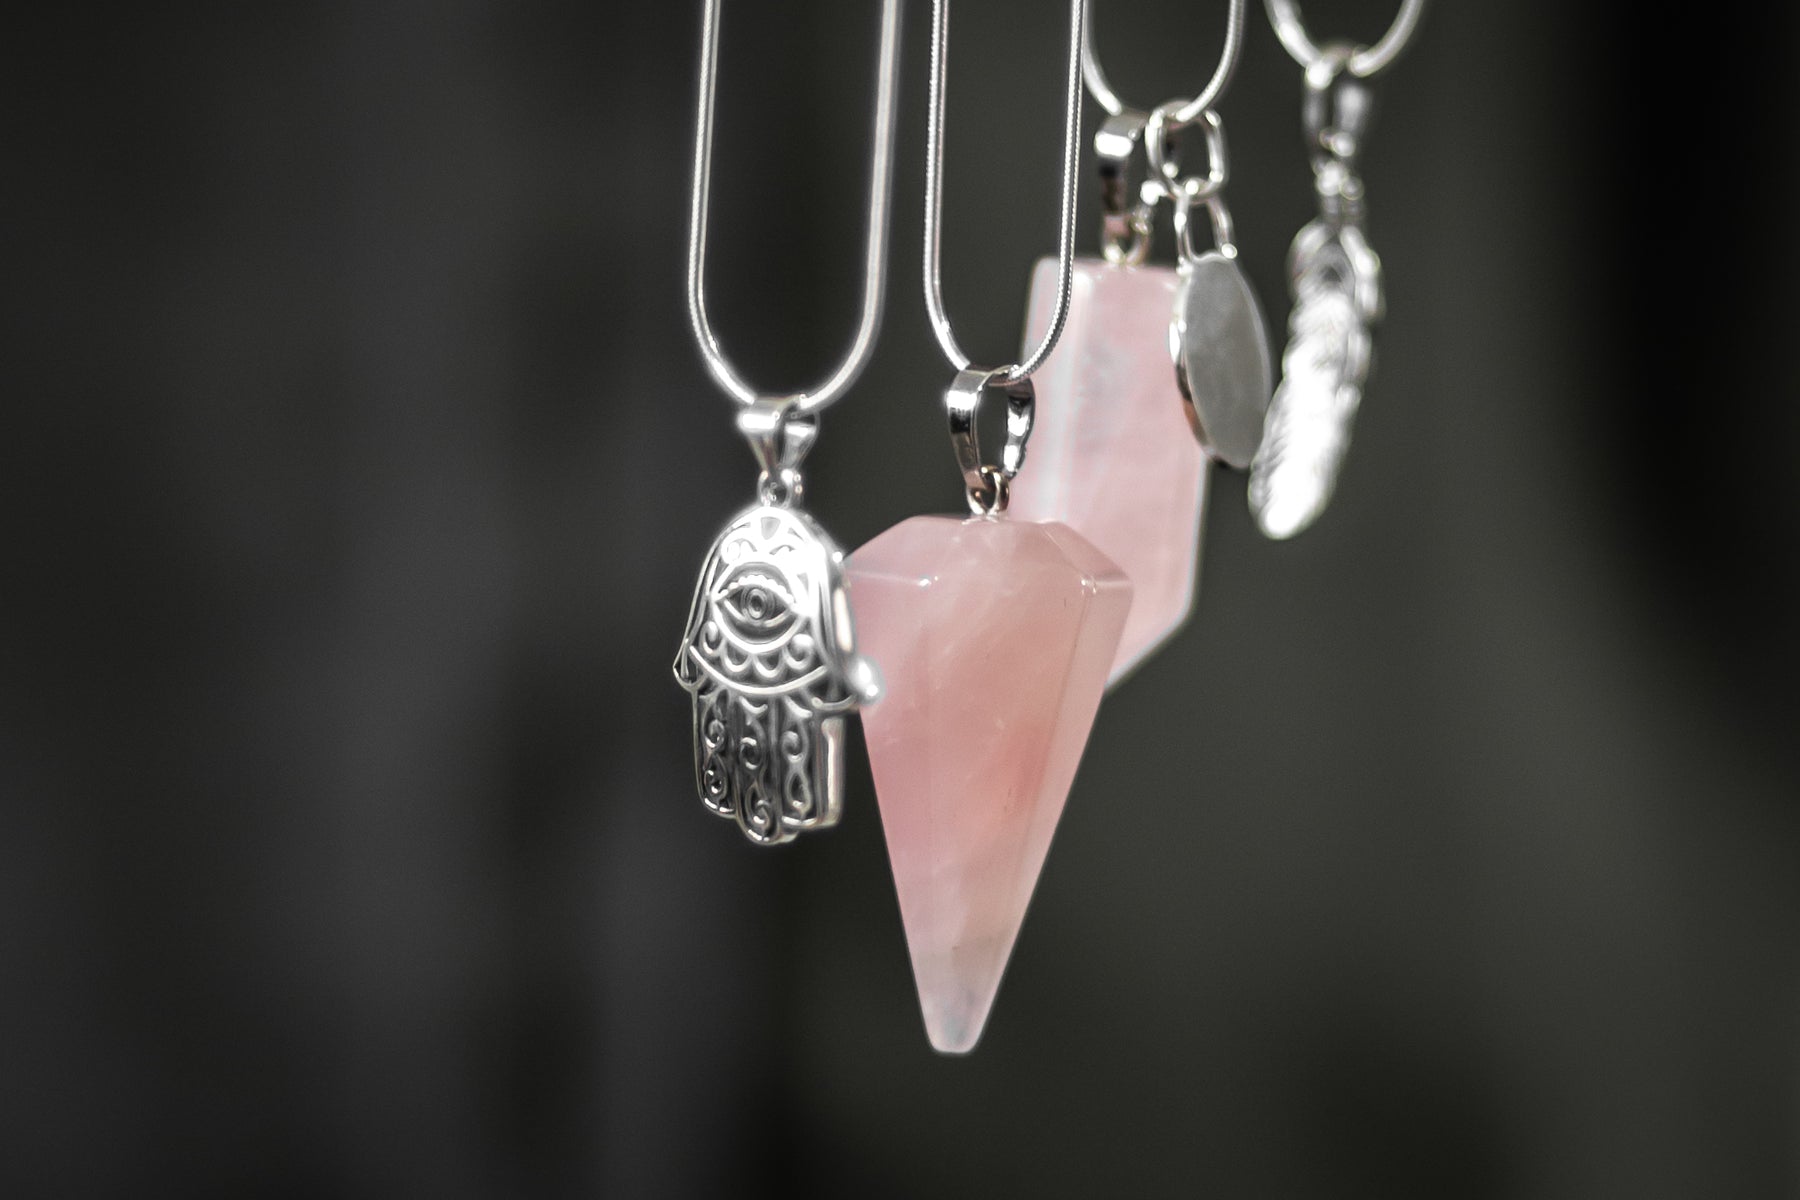 An array of of rose quartz crystals and sterling silver charms dangling in unison. 